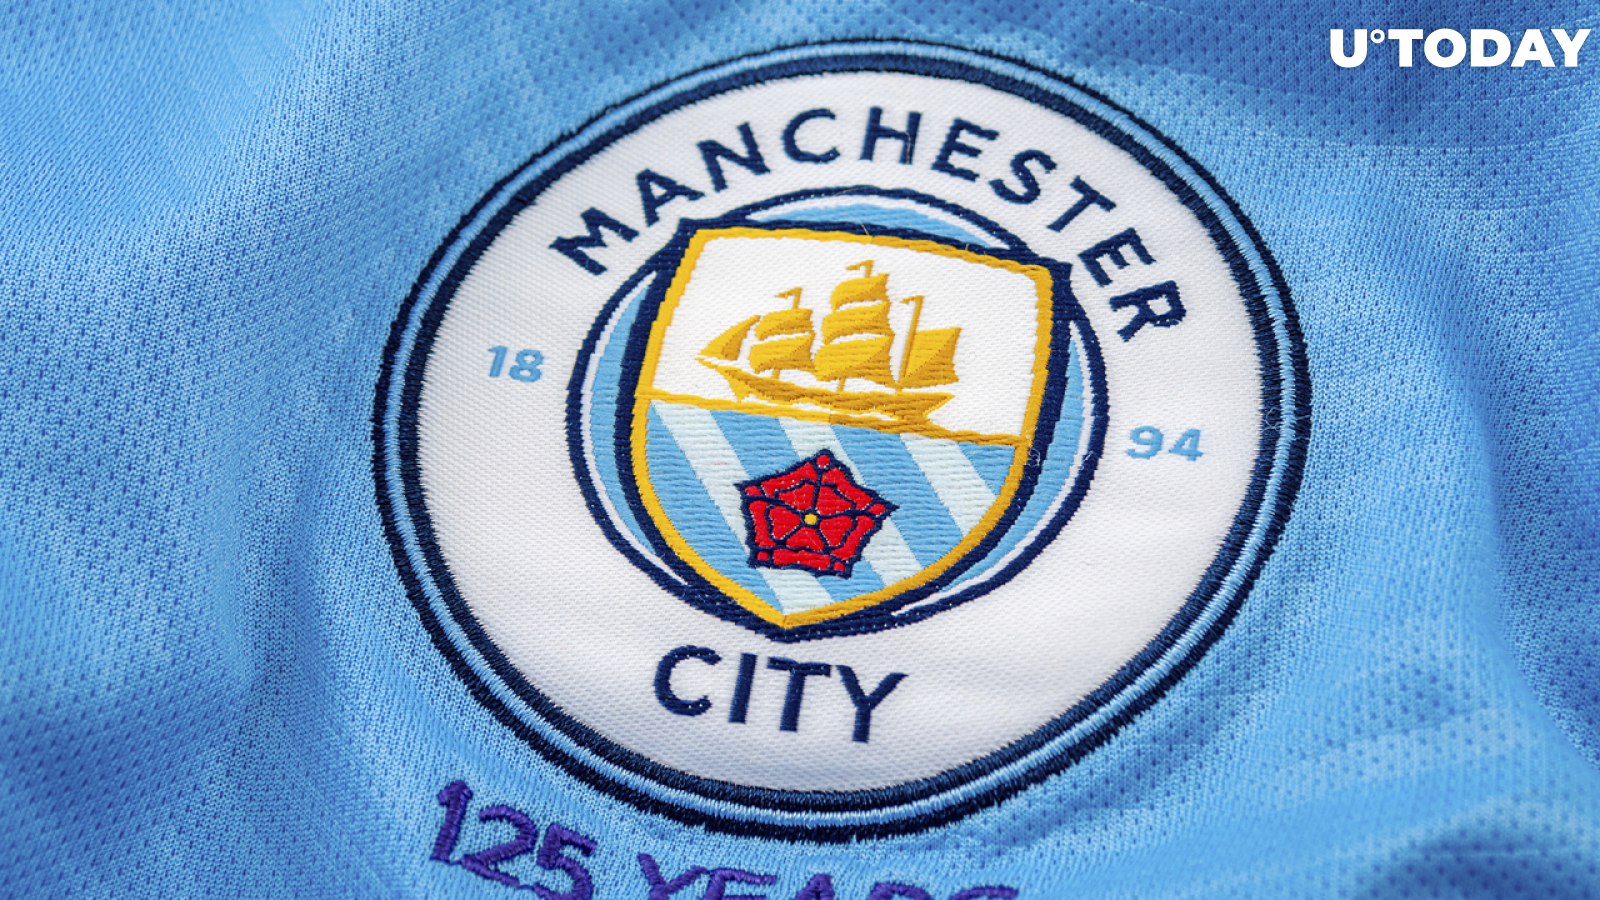 Manchester City Partners with One of Largest Cryptocurrency Exchanges